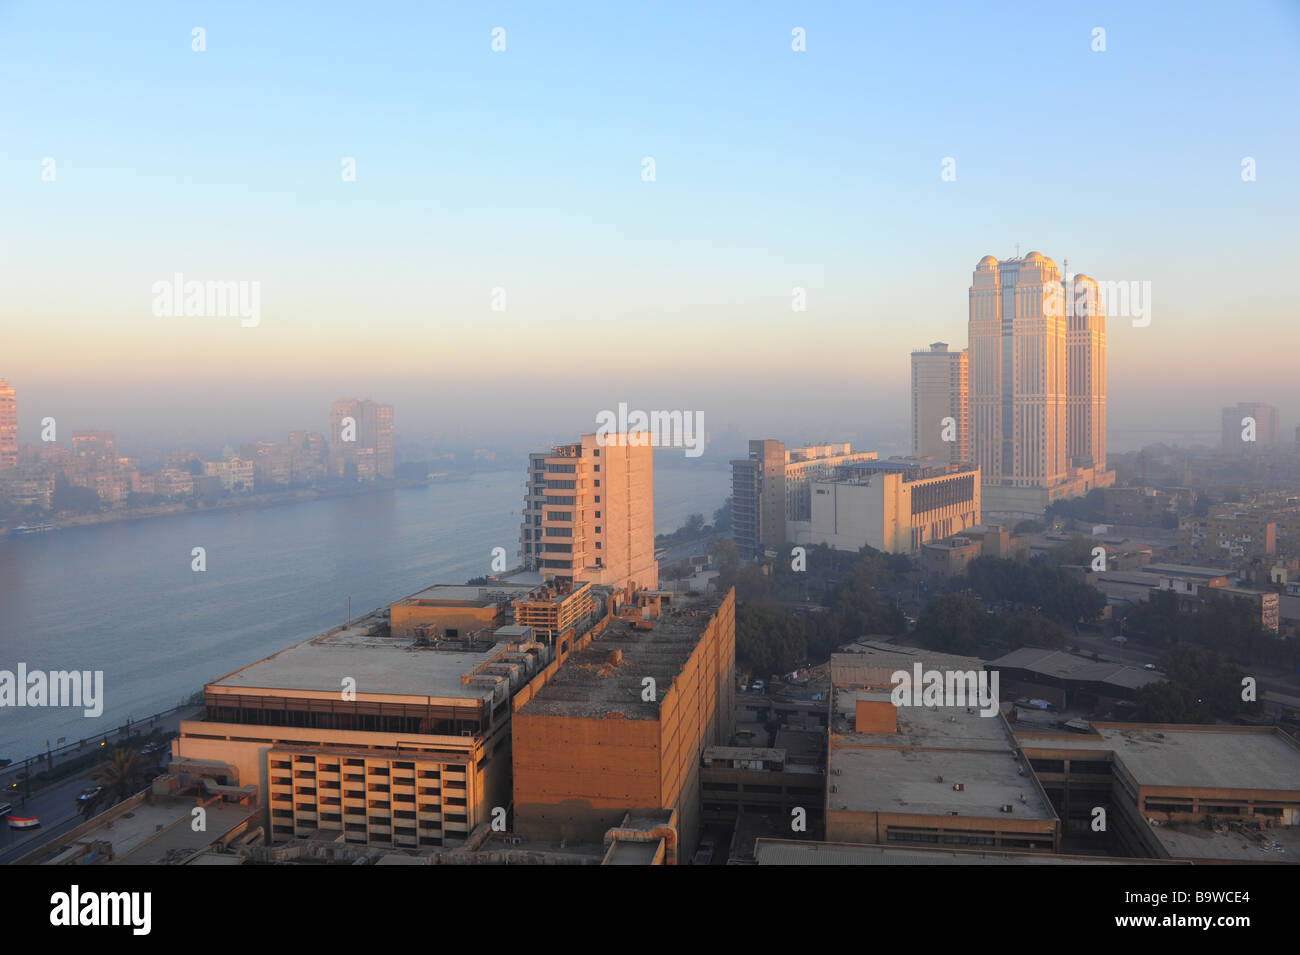 Egypt Cairo Nile River at sunrise with poor air quality pollution Stock Photo